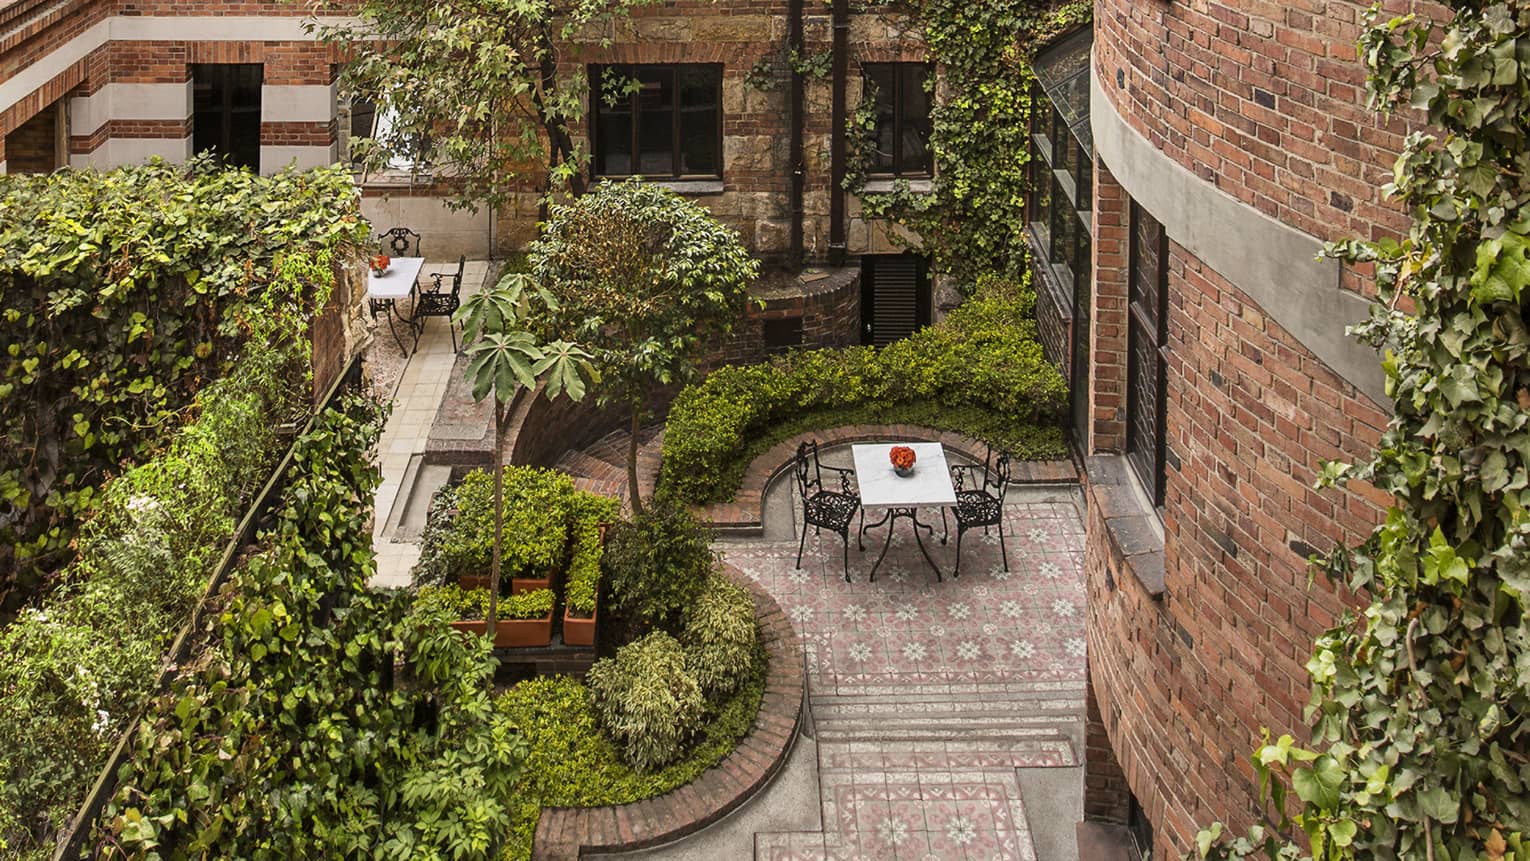 Aerial view of wrought-iron patio tables and chairs in brick courtyard, trees and shrubs throughout